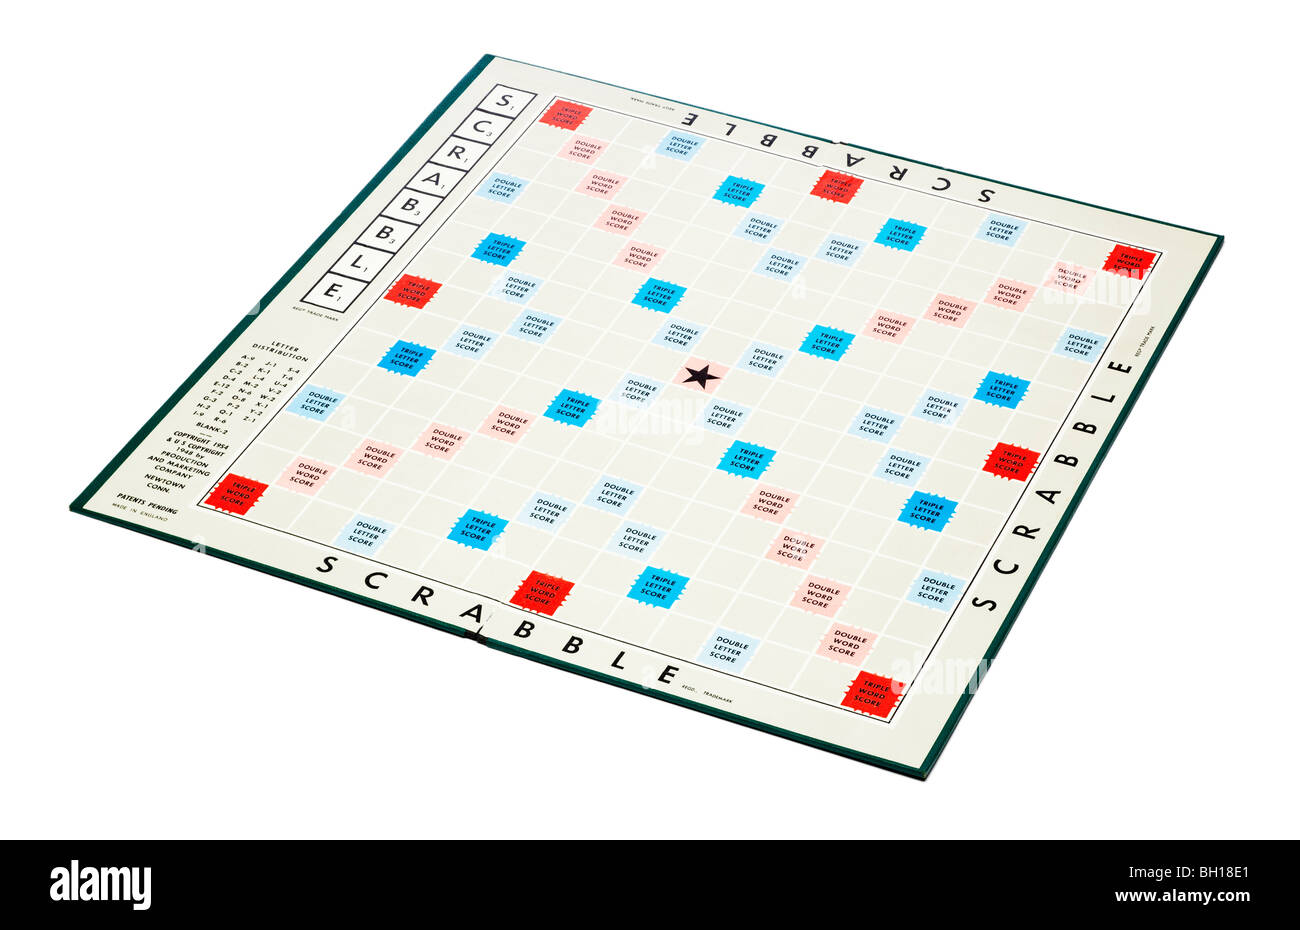 Scrabble game board without tiles Stock Photo